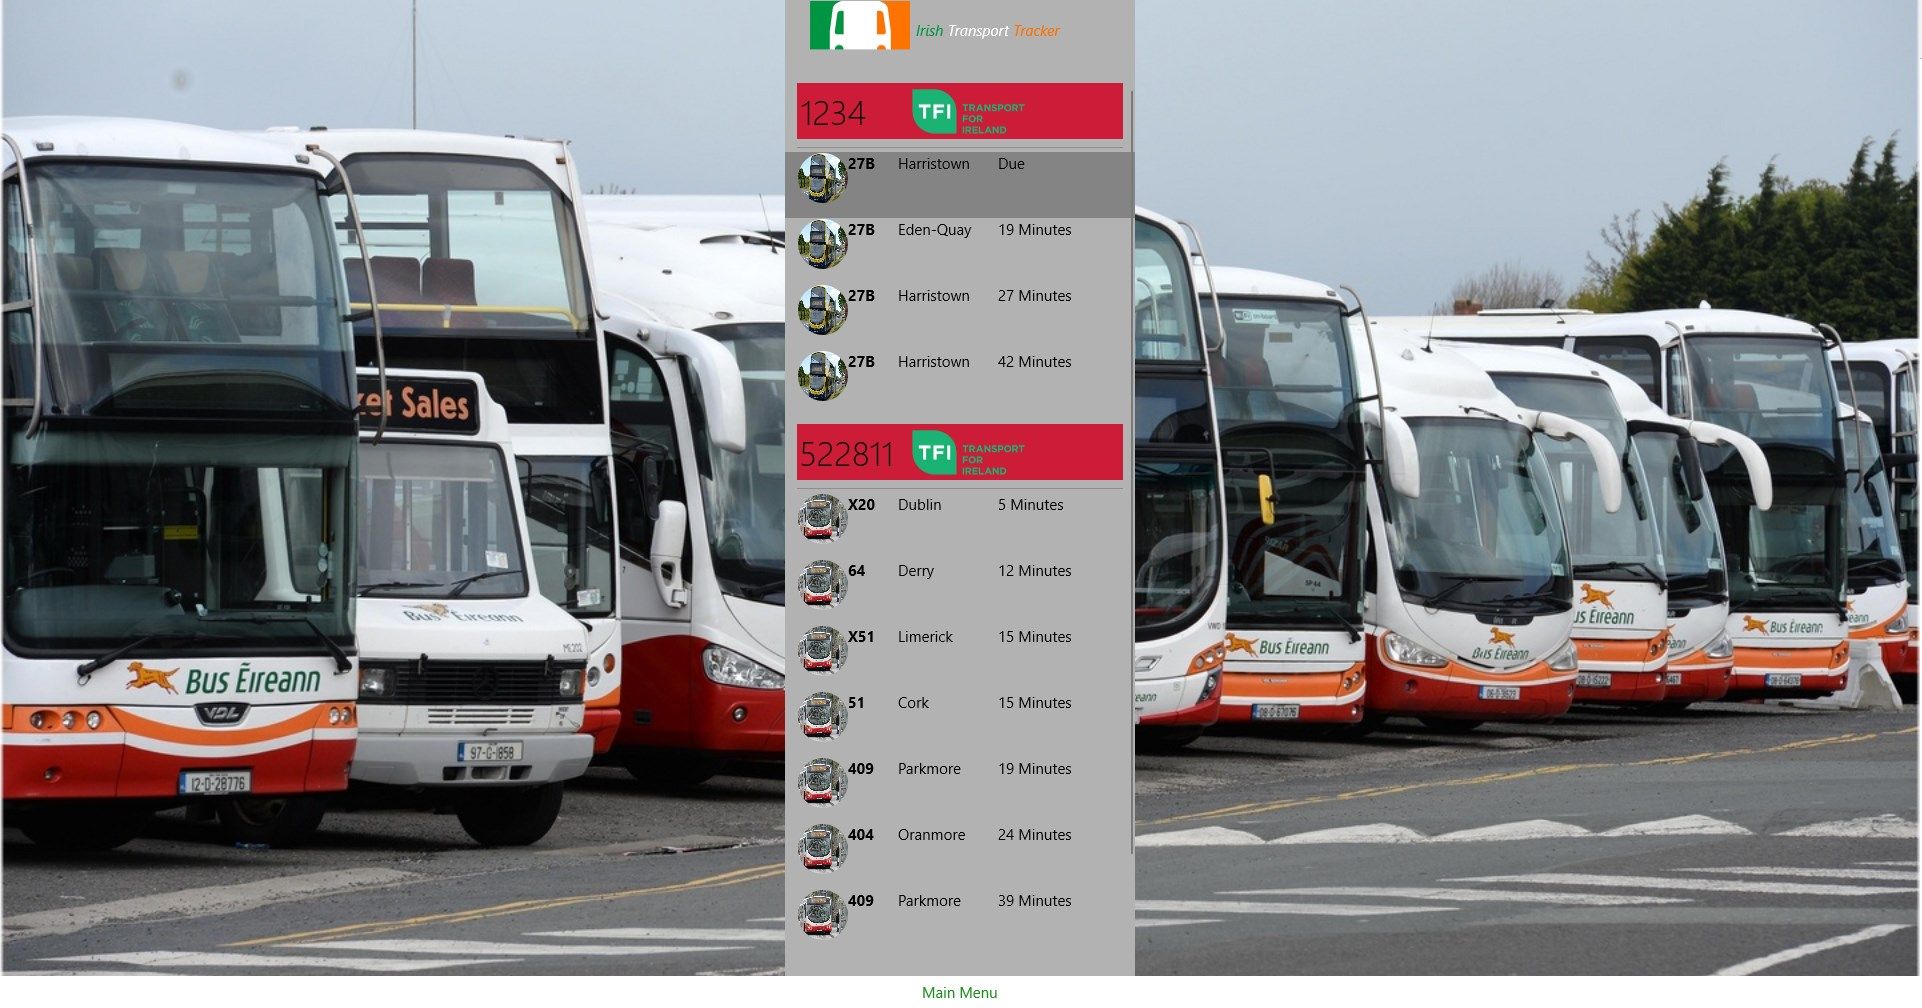 Added bus stop IDs display